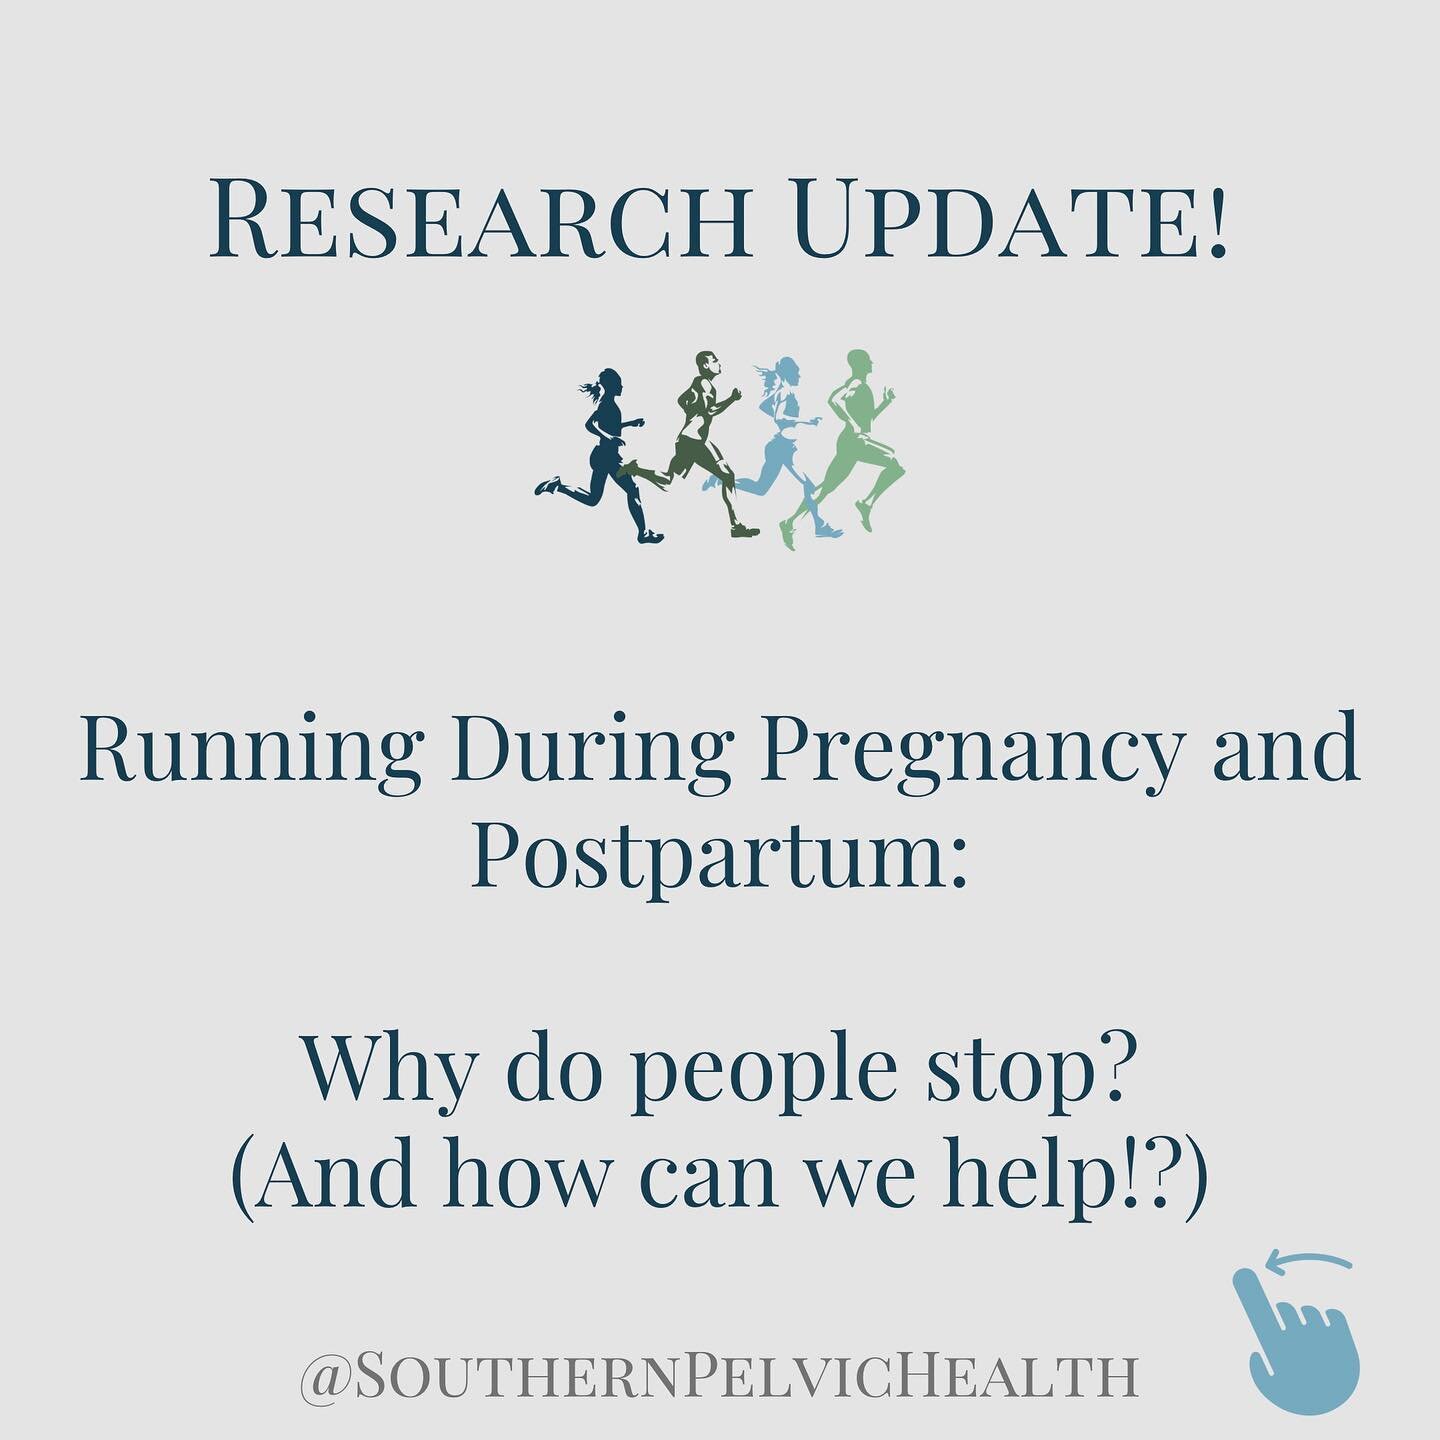 🏃&zwj;♀️This past week, our team at SPH discussed the new journal article published in @jwhpt on running during pregnancy and postpartum. This article discussed why people stop running during pregnancy and in the postpartum period, and helped to pro